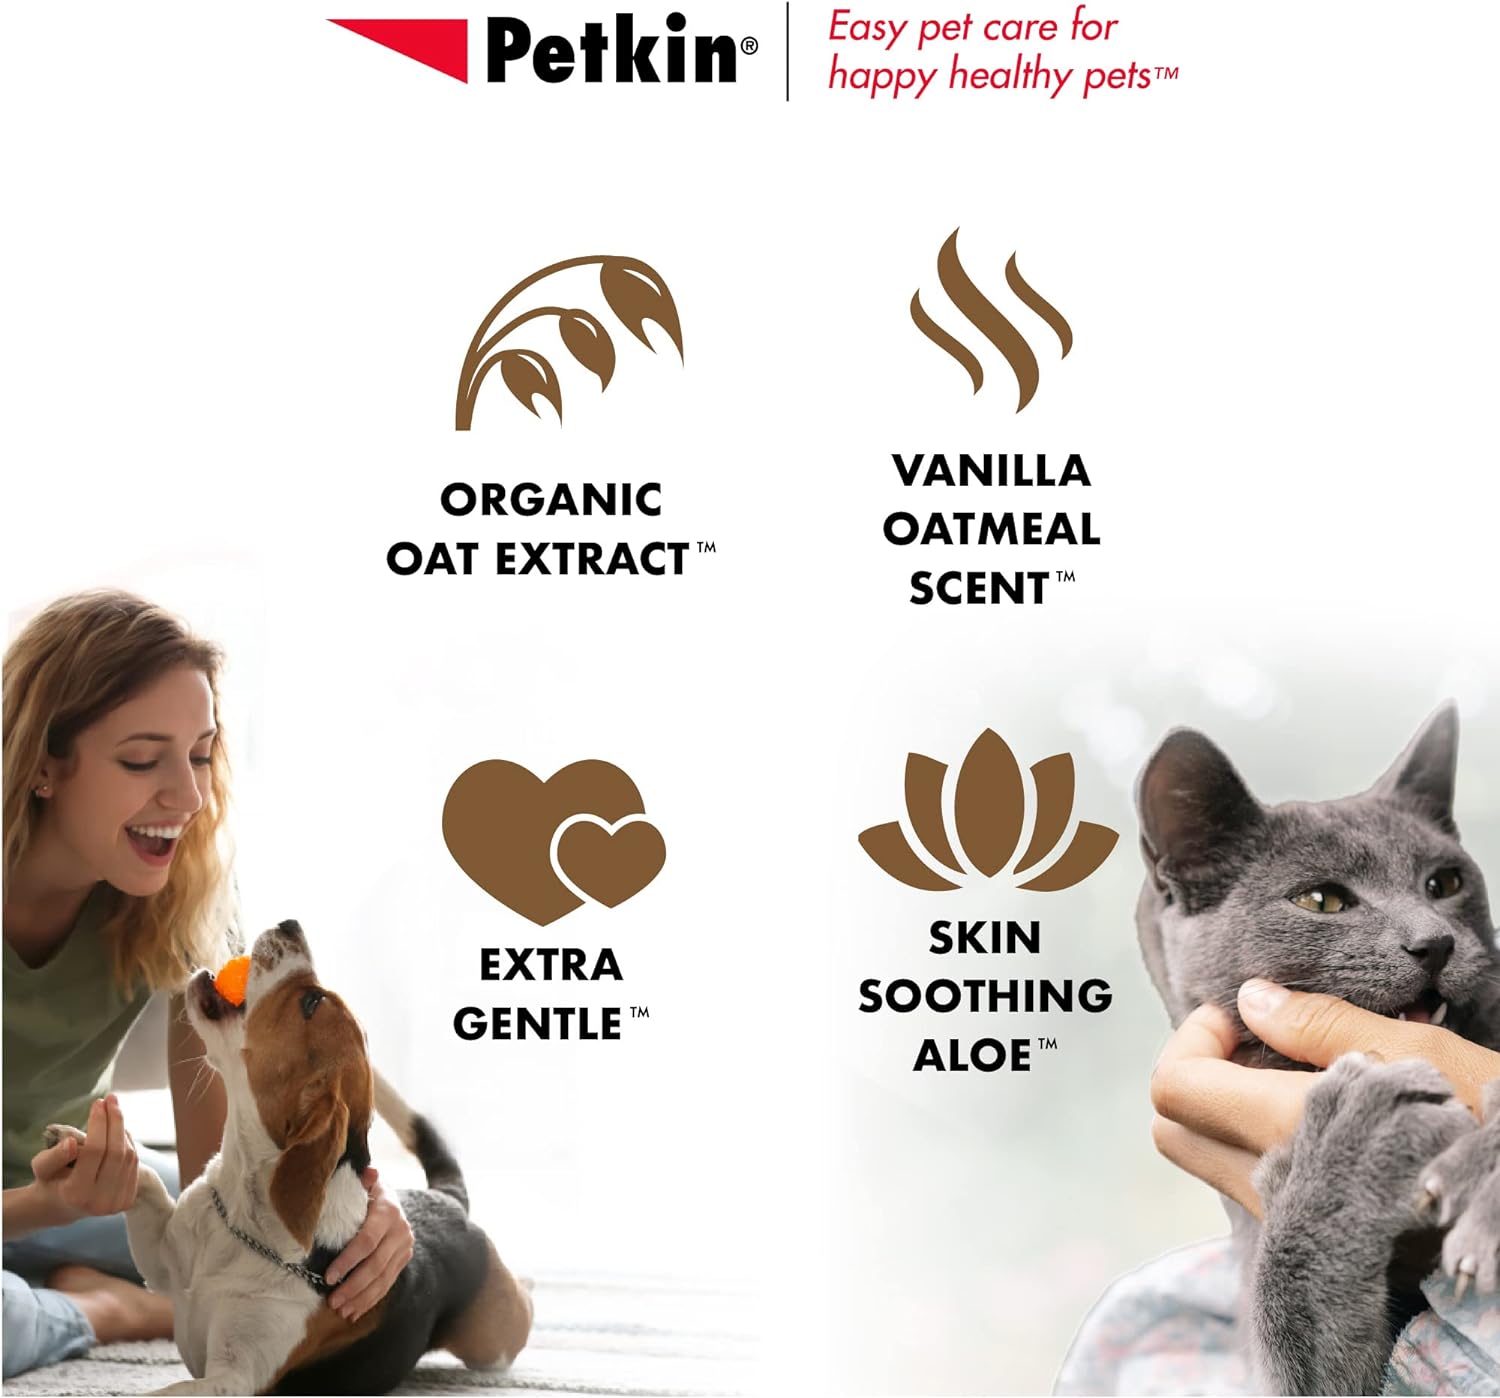 Petkin Large Oatmeal Pet Wipes for Dogs and Cats, 400 Count, Soothes Itchy Skin and Cleans Ears, Face, Butt, Body and Eye Area : Pet Supplies